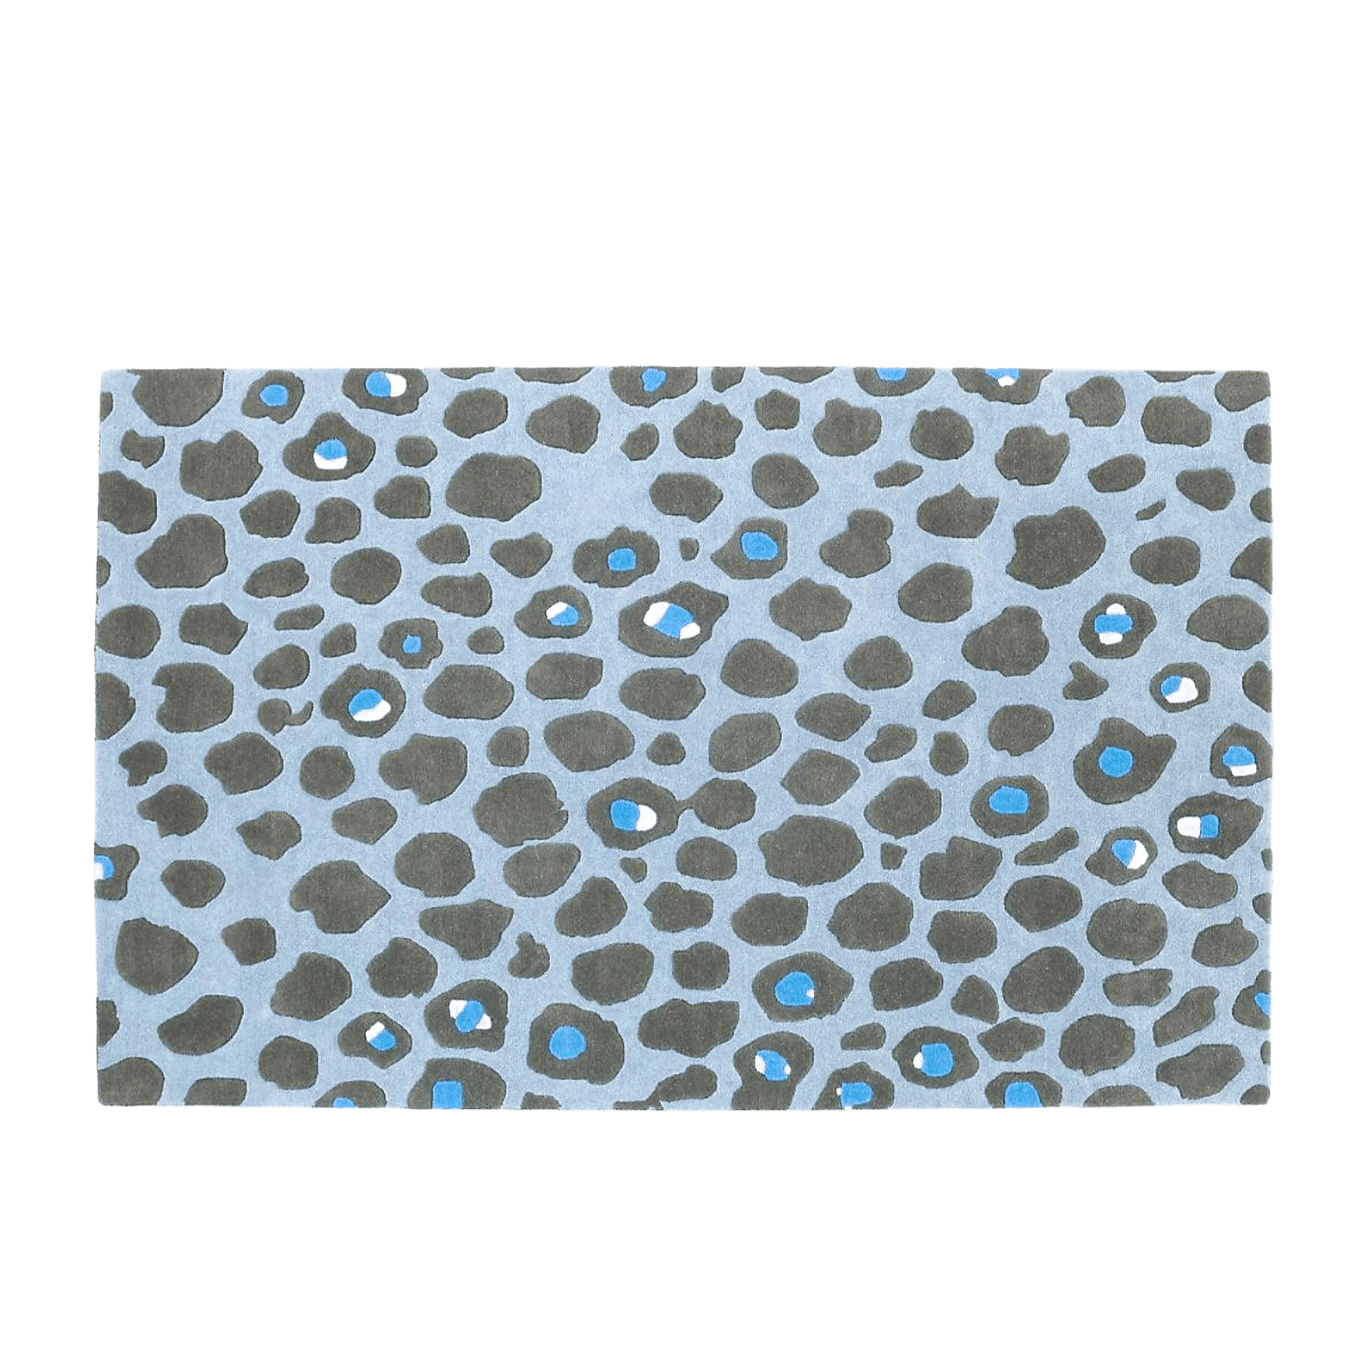 Blue and Black Leopard Print Hand Tufted Wool Rug. - MAIA HOMES